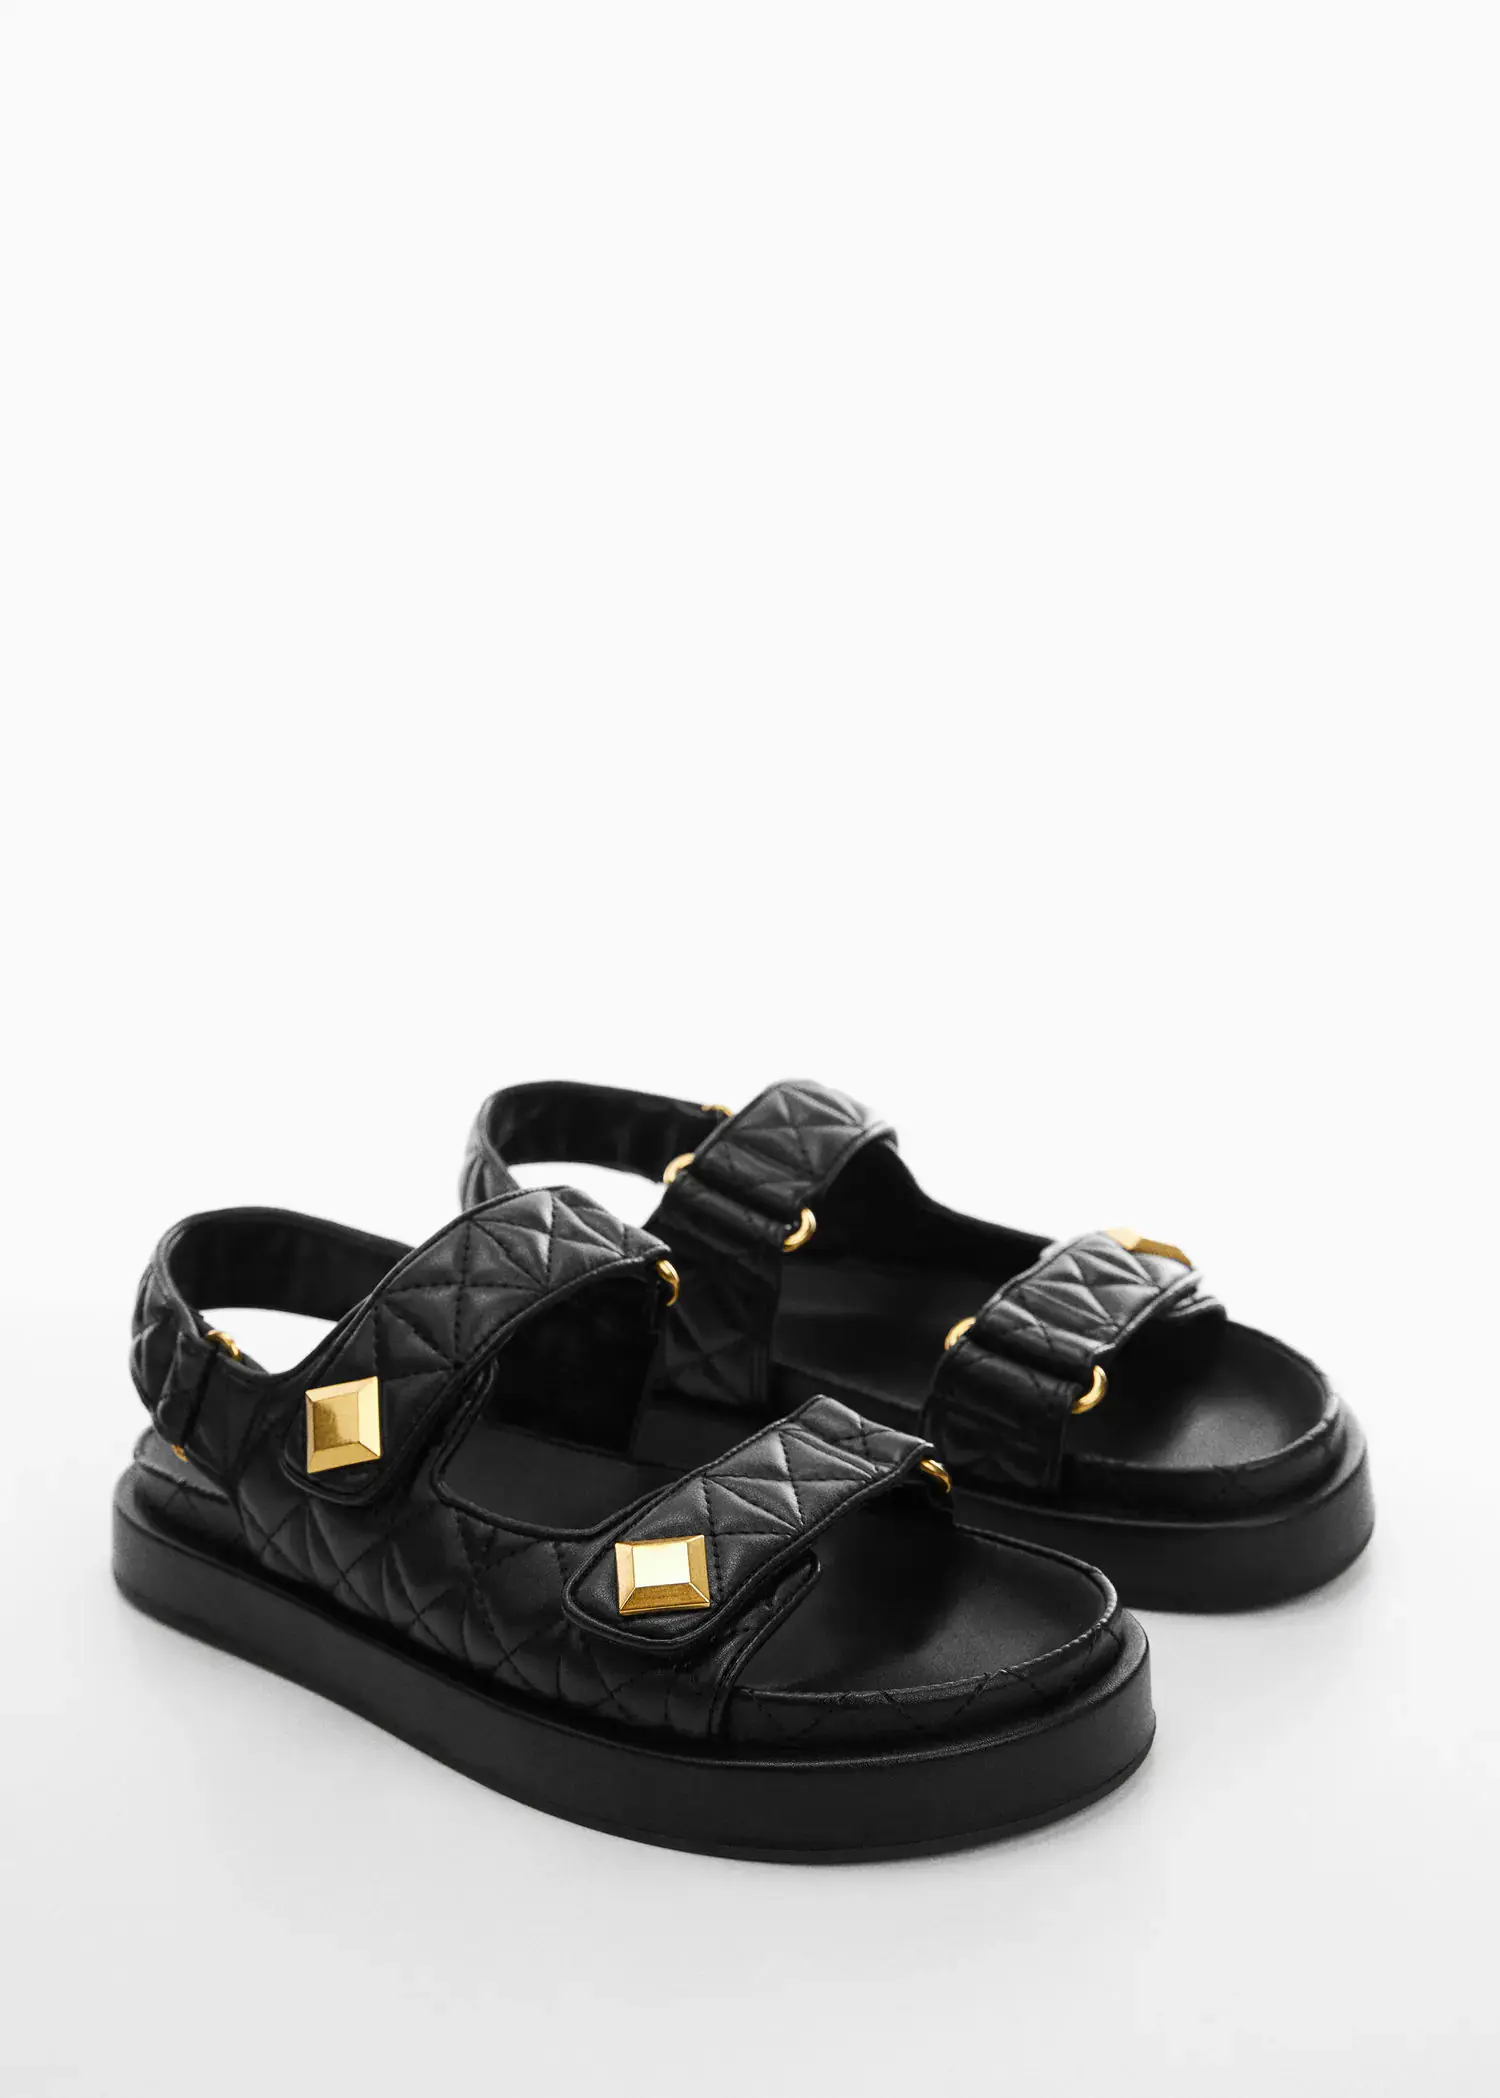 Mango Velcro padded sandal. a pair of black sandals on a white surface. 